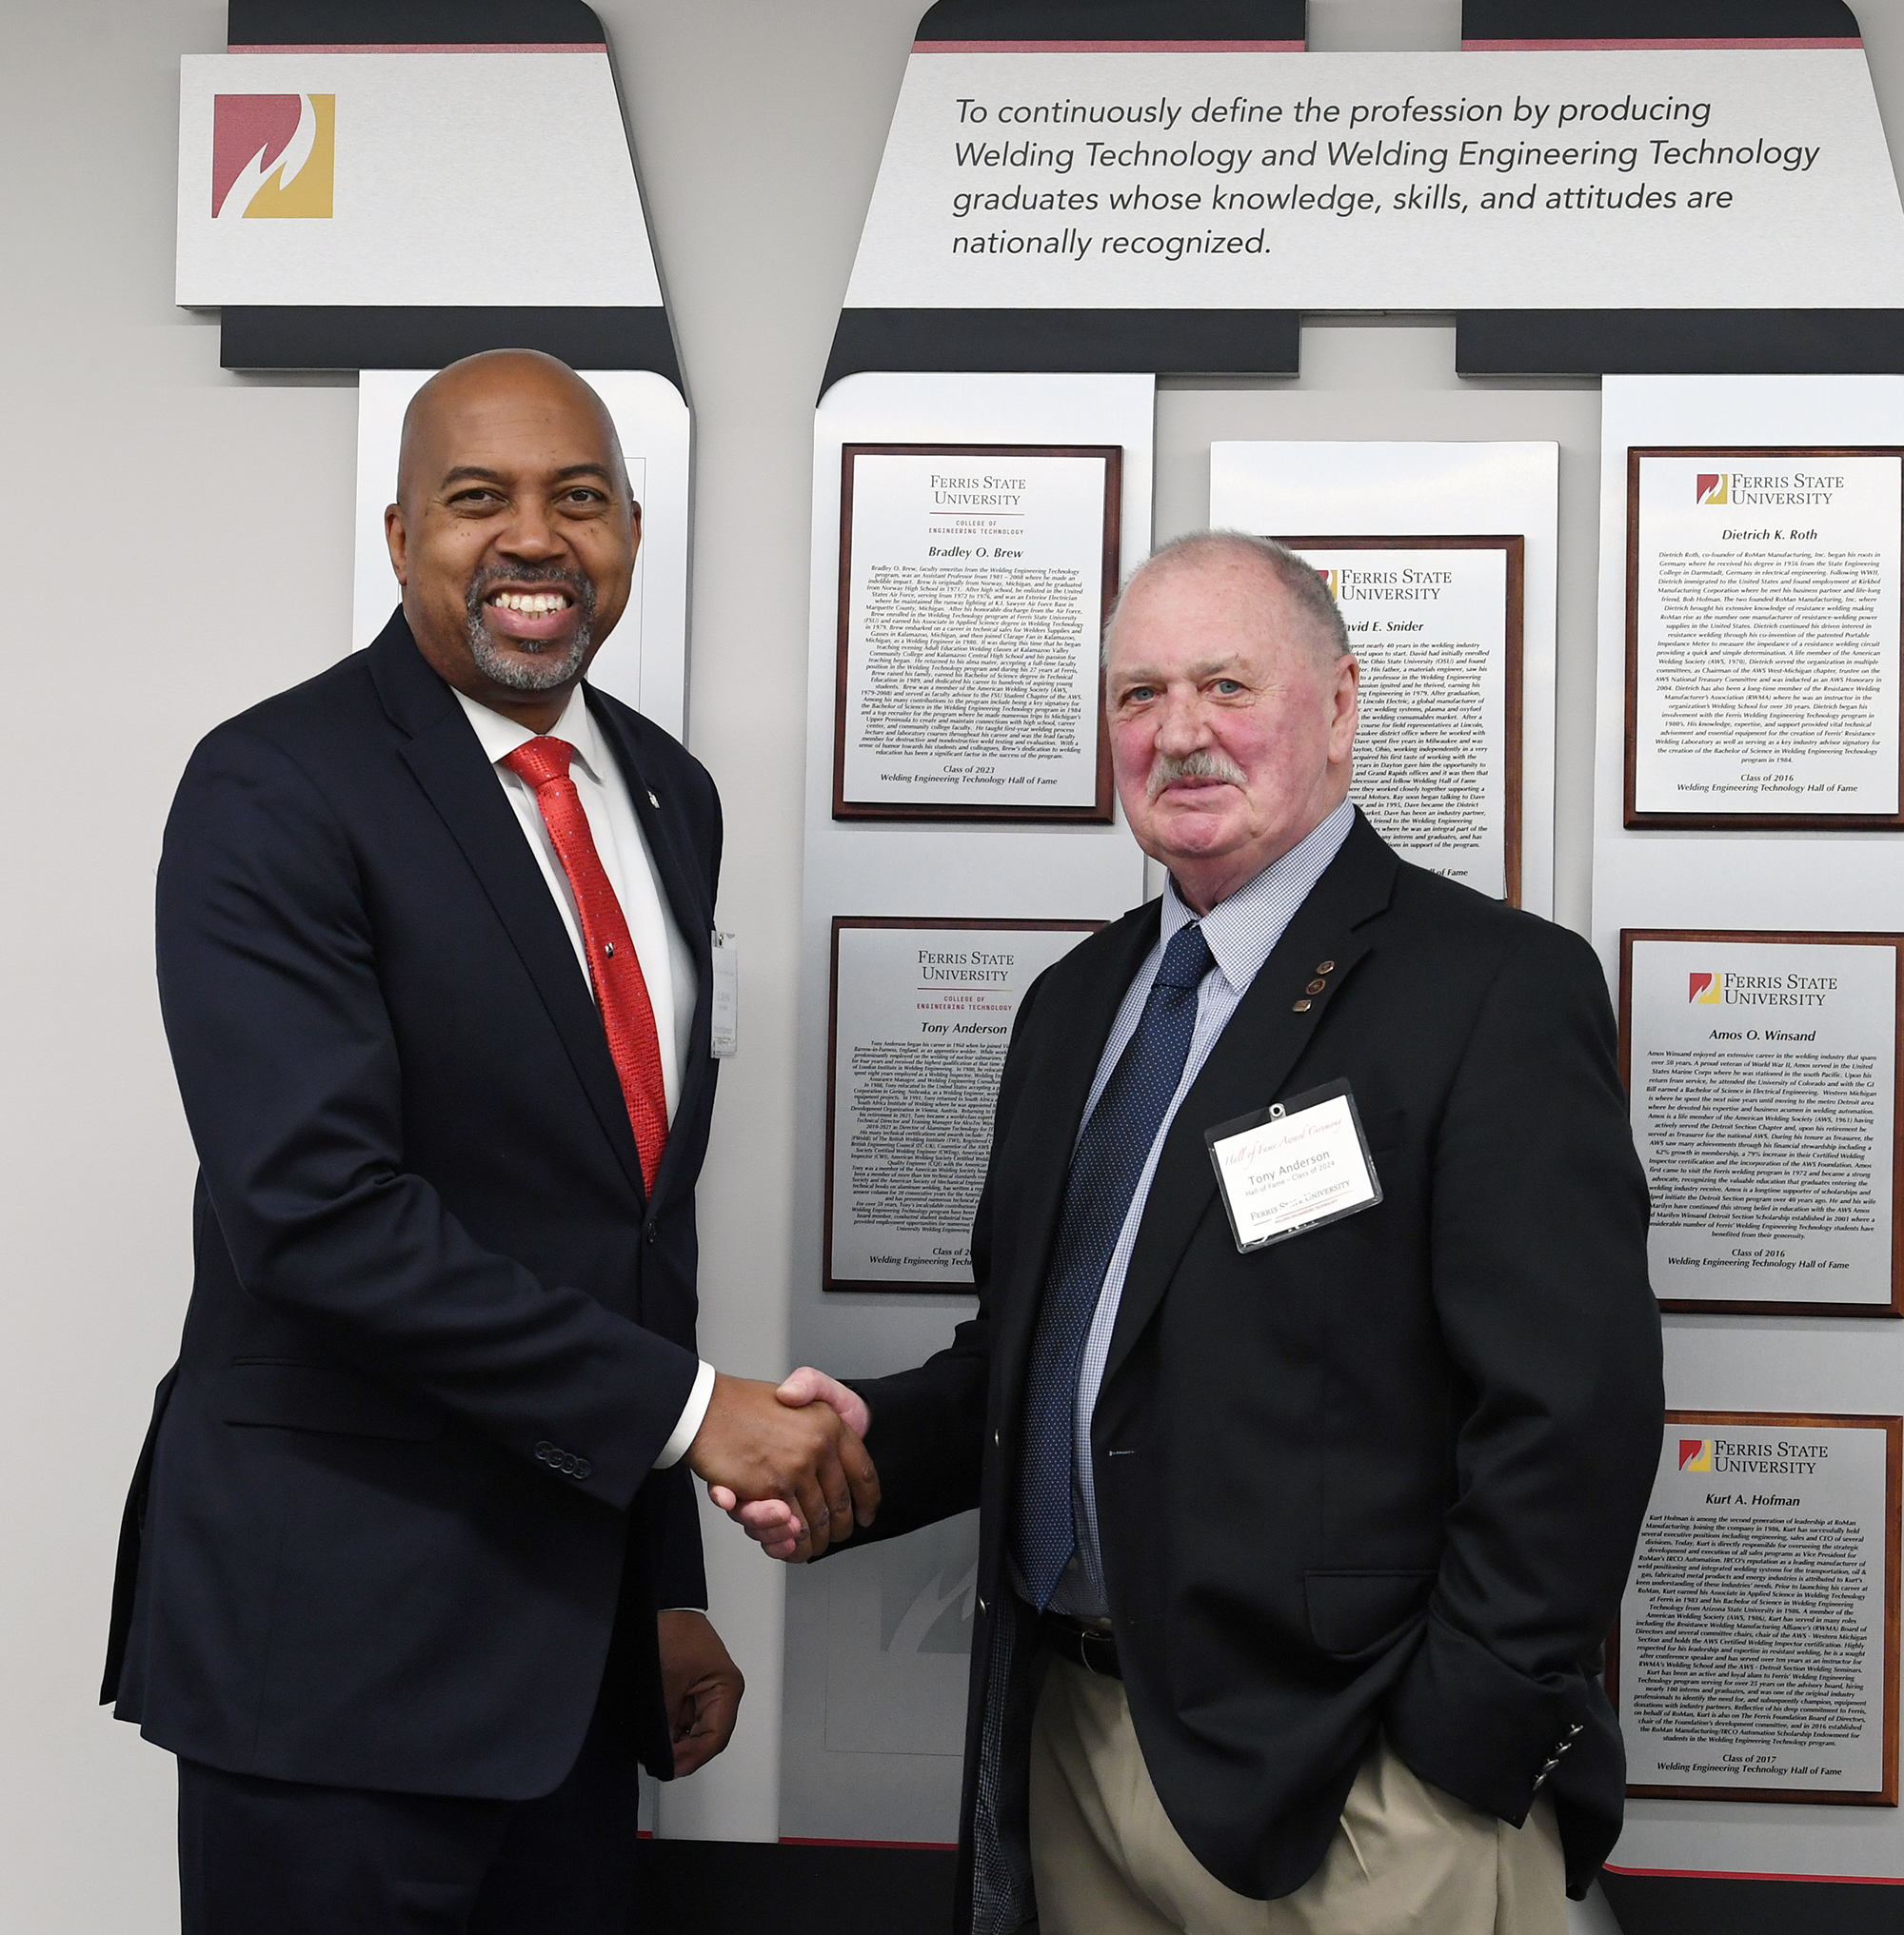 Tony Anderson, respected internationally for his expertise, named to Welding Engineering Technology Hall of Fame at Ferris State